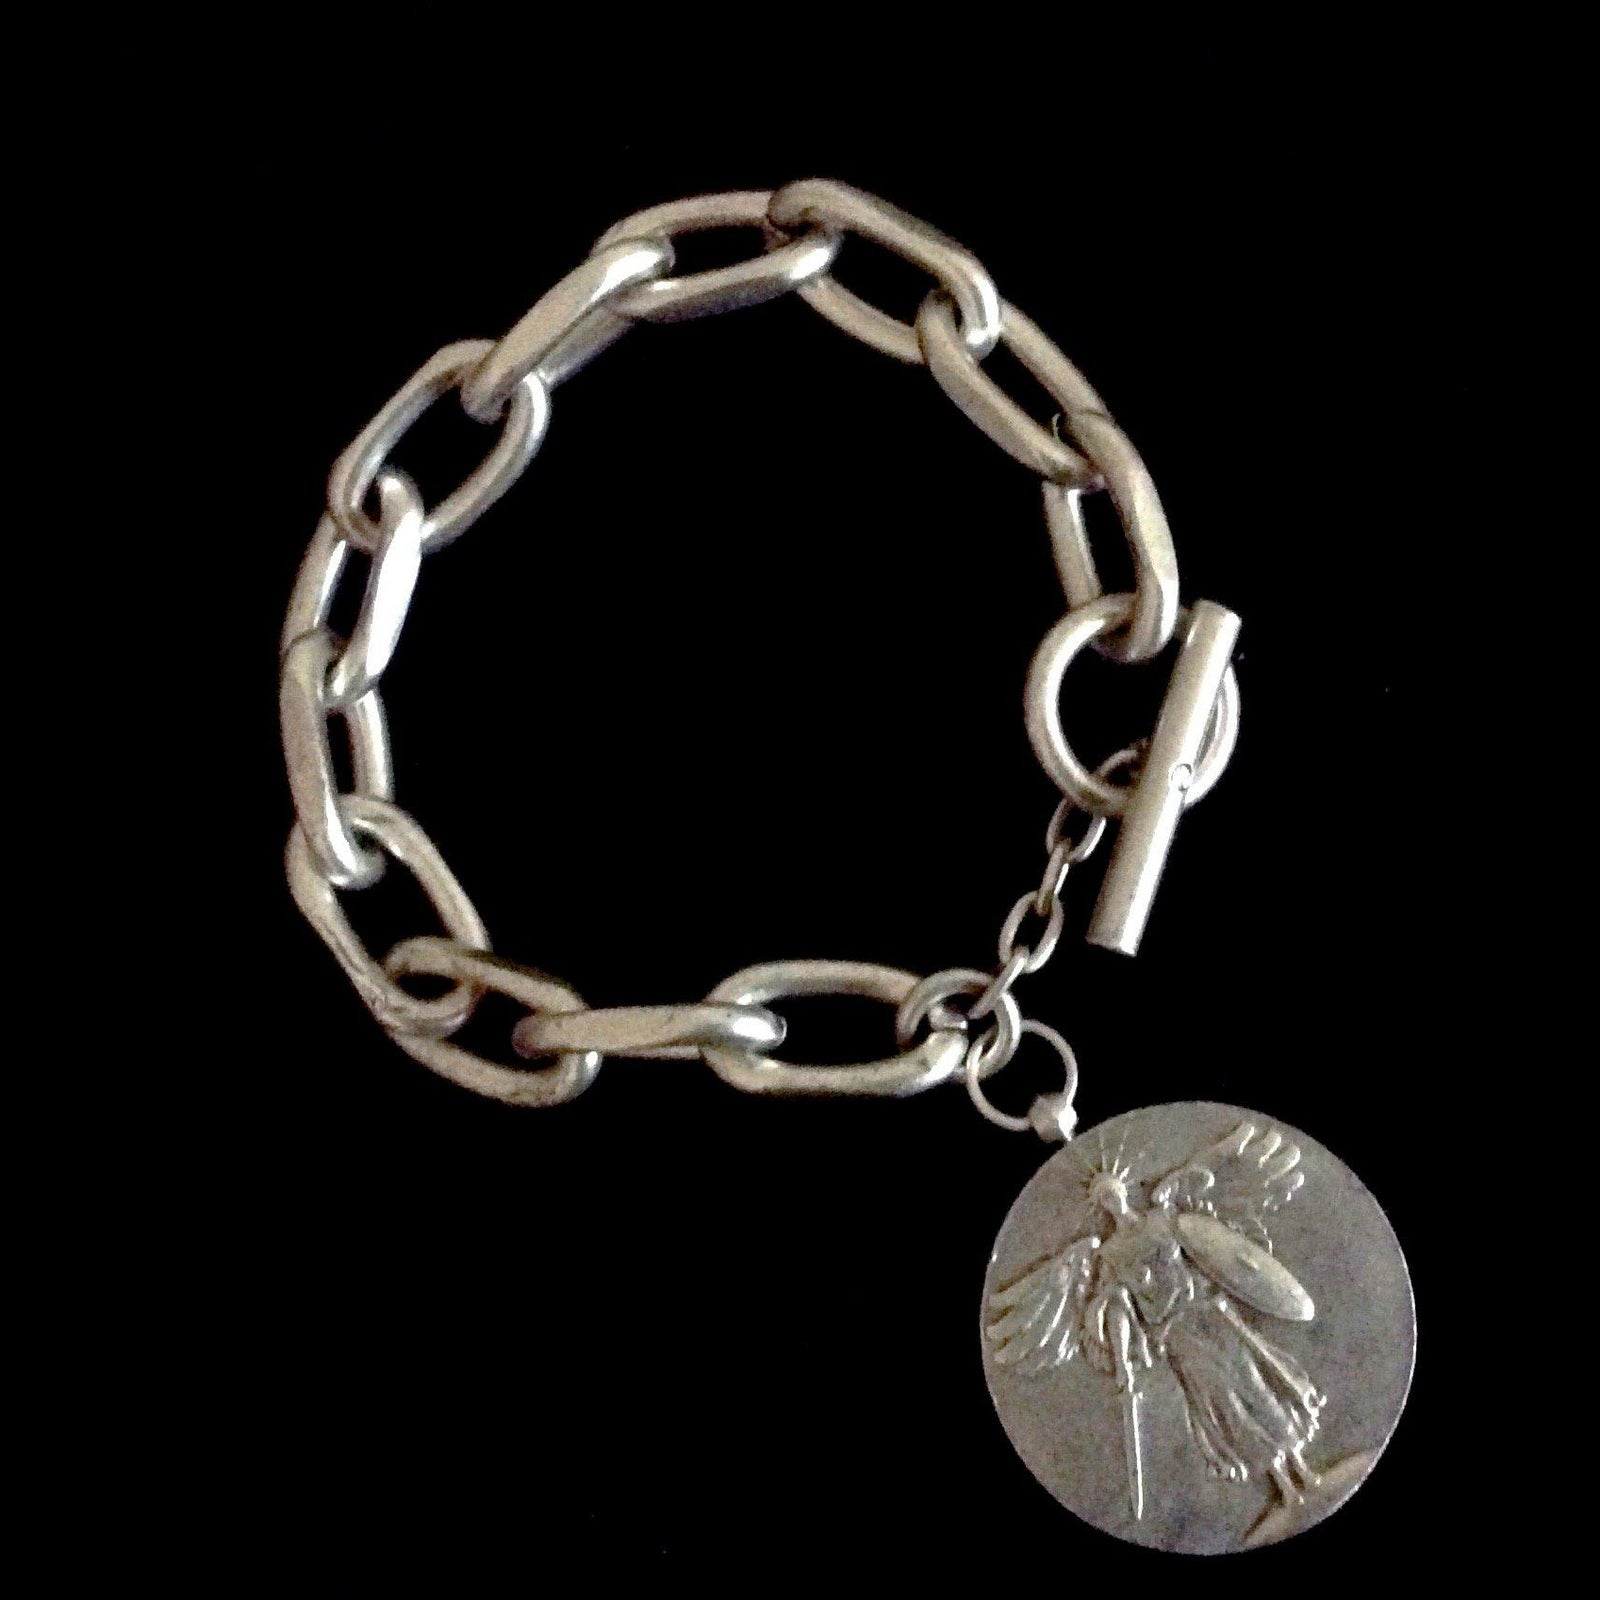 St. Michael Protection Bracelet for Kids | Karlas Jewelry & Gifts